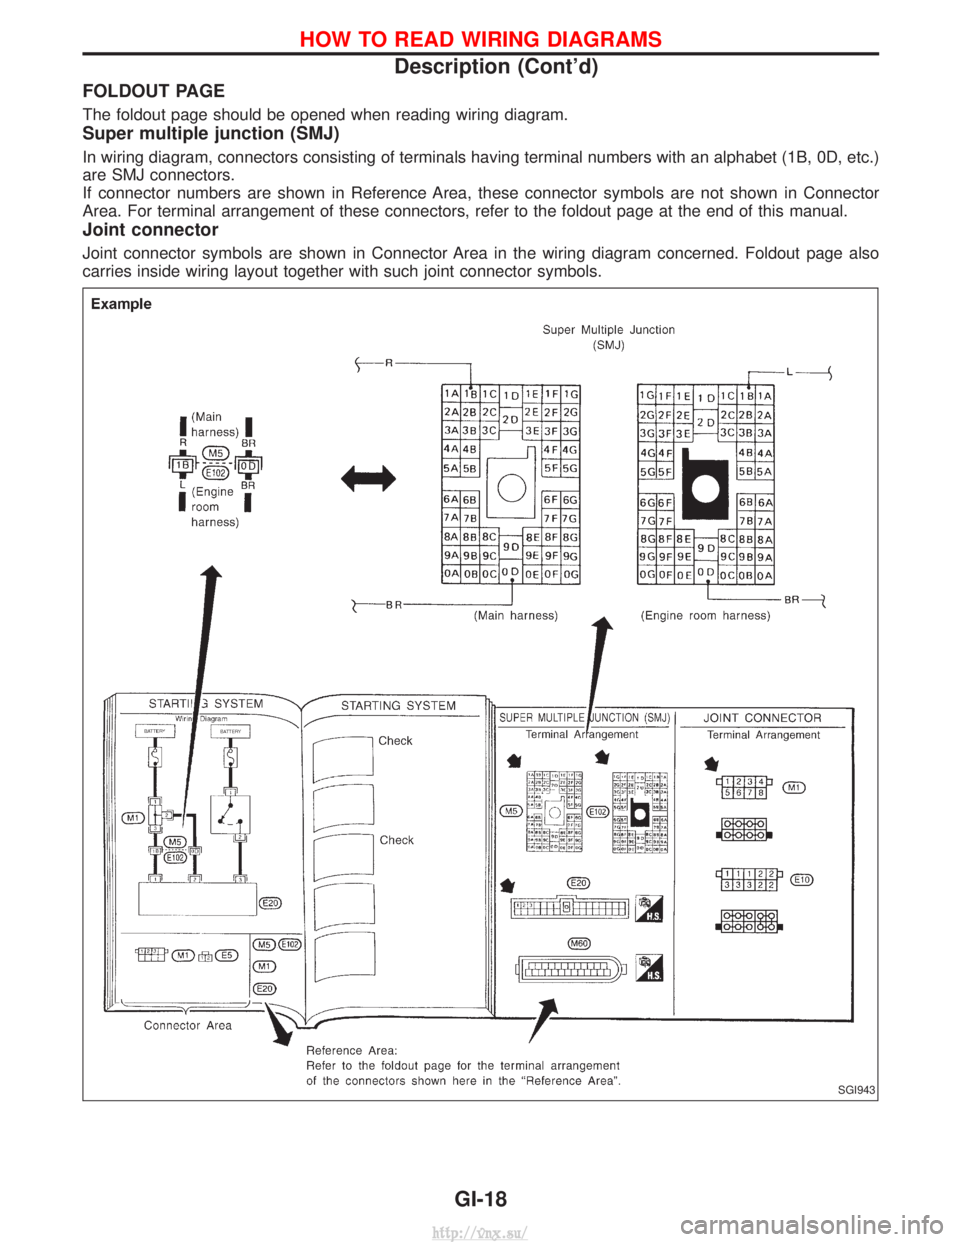 NISSAN TERRANO 2004  Service Repair Manual FOLDOUT PAGE
The foldout page should be opened when reading wiring diagram.
Super multiple junction (SMJ)
In wiring diagram, connectors consisting of terminals having terminal numbers with an alphabet